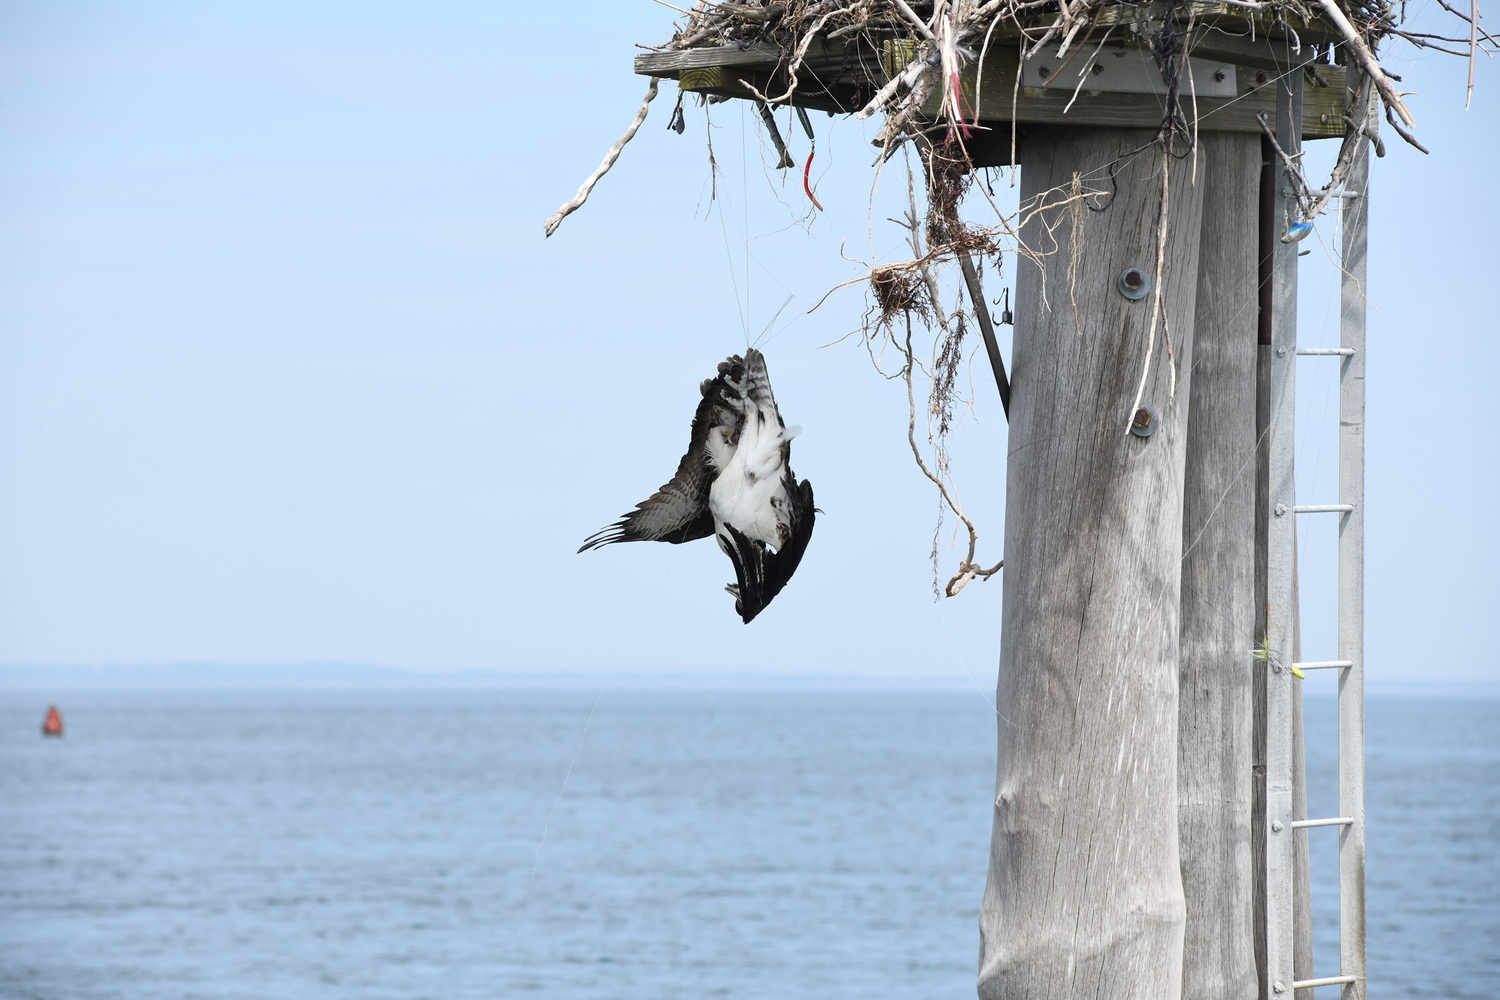 With the fishing line around its leg the osprey end up upside down and unable to get itself back into the nest. DOUG KUNTZ